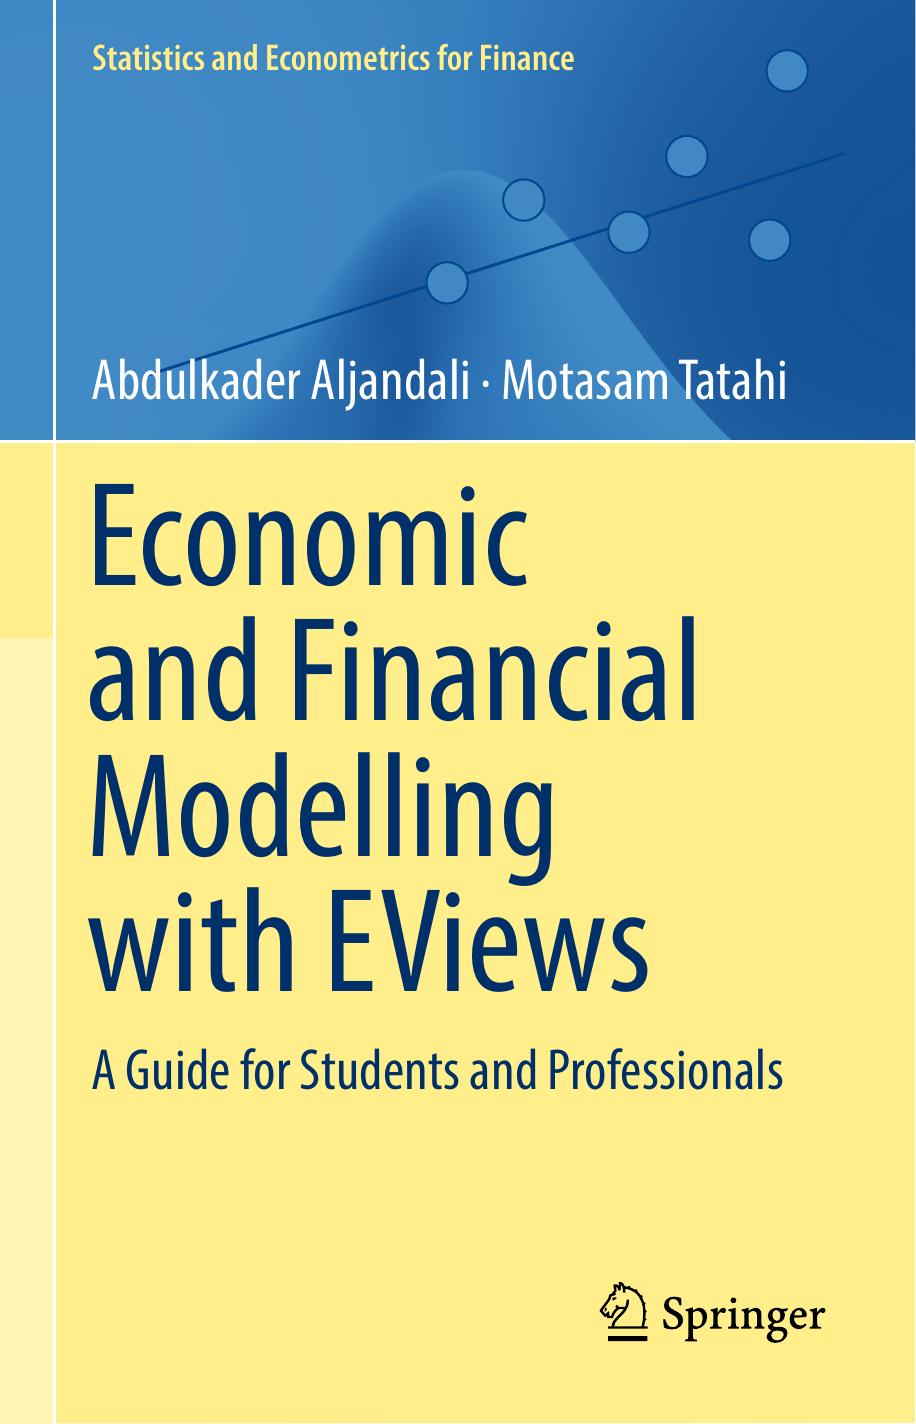 Economic and Financial Modelling 2018.pdf